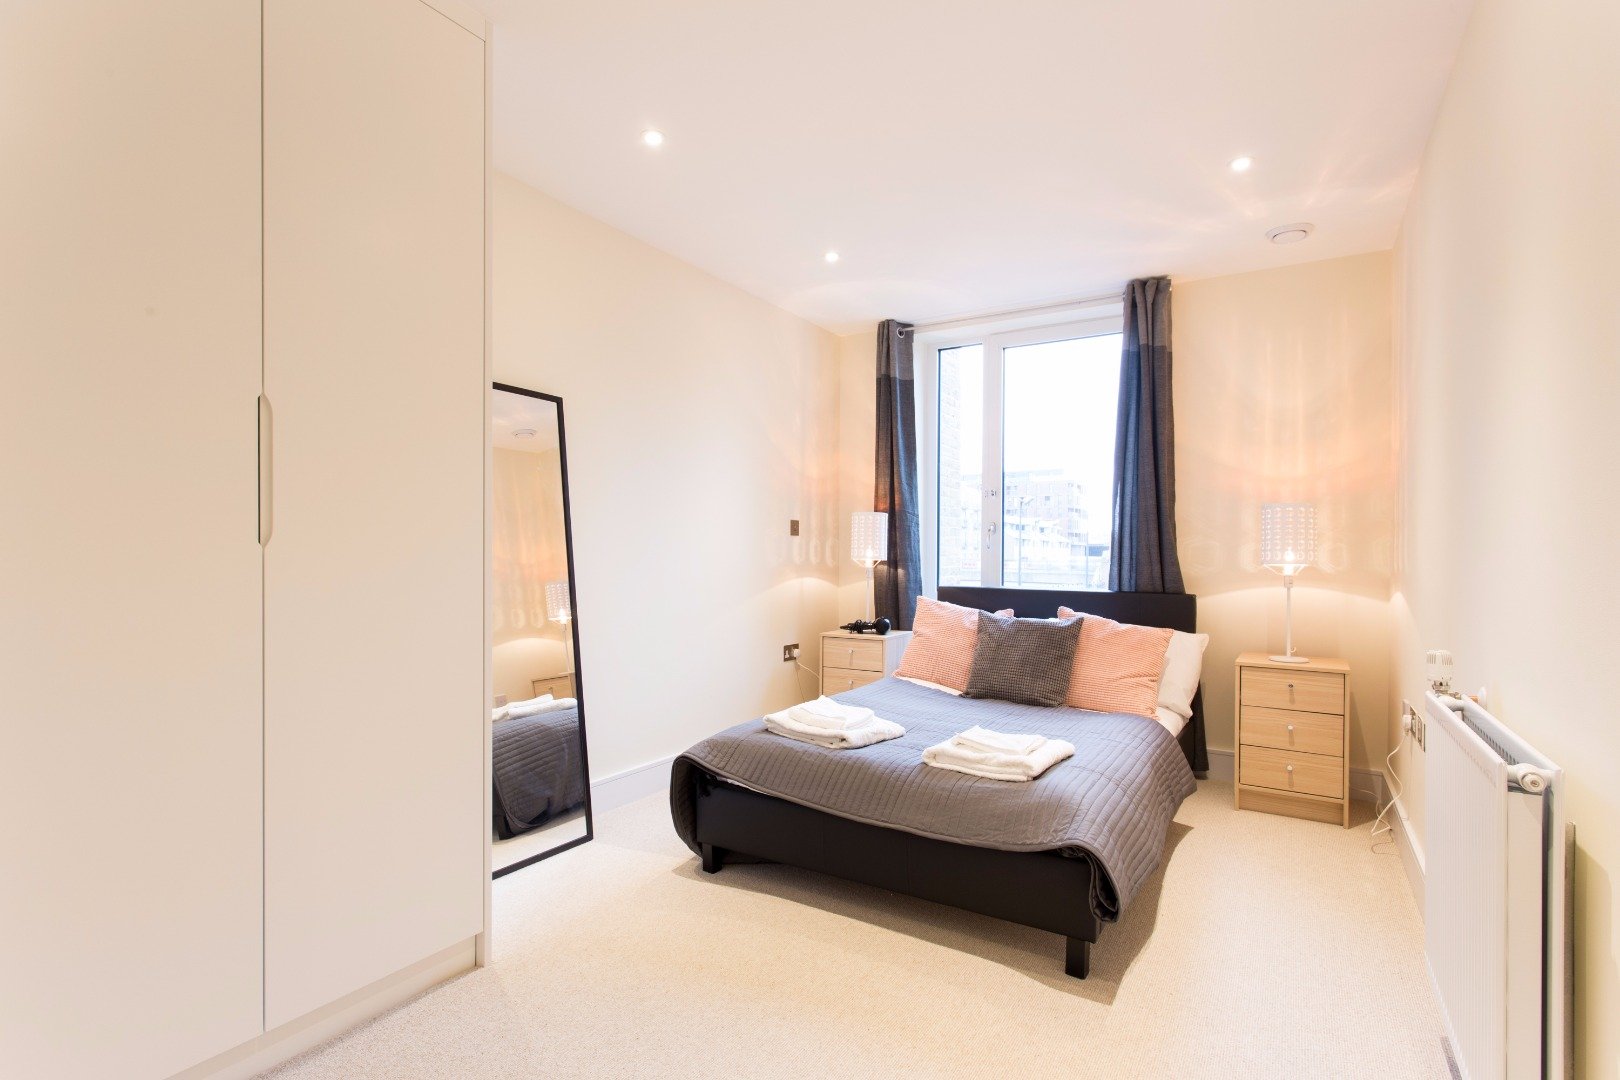 Looking-for-affordable-apartments-within-easy-access-to-Canary-Wharf?-why-not-book-our-lovely-Poplar-Serviced-Apartments-today.-Call-for-great-rates.